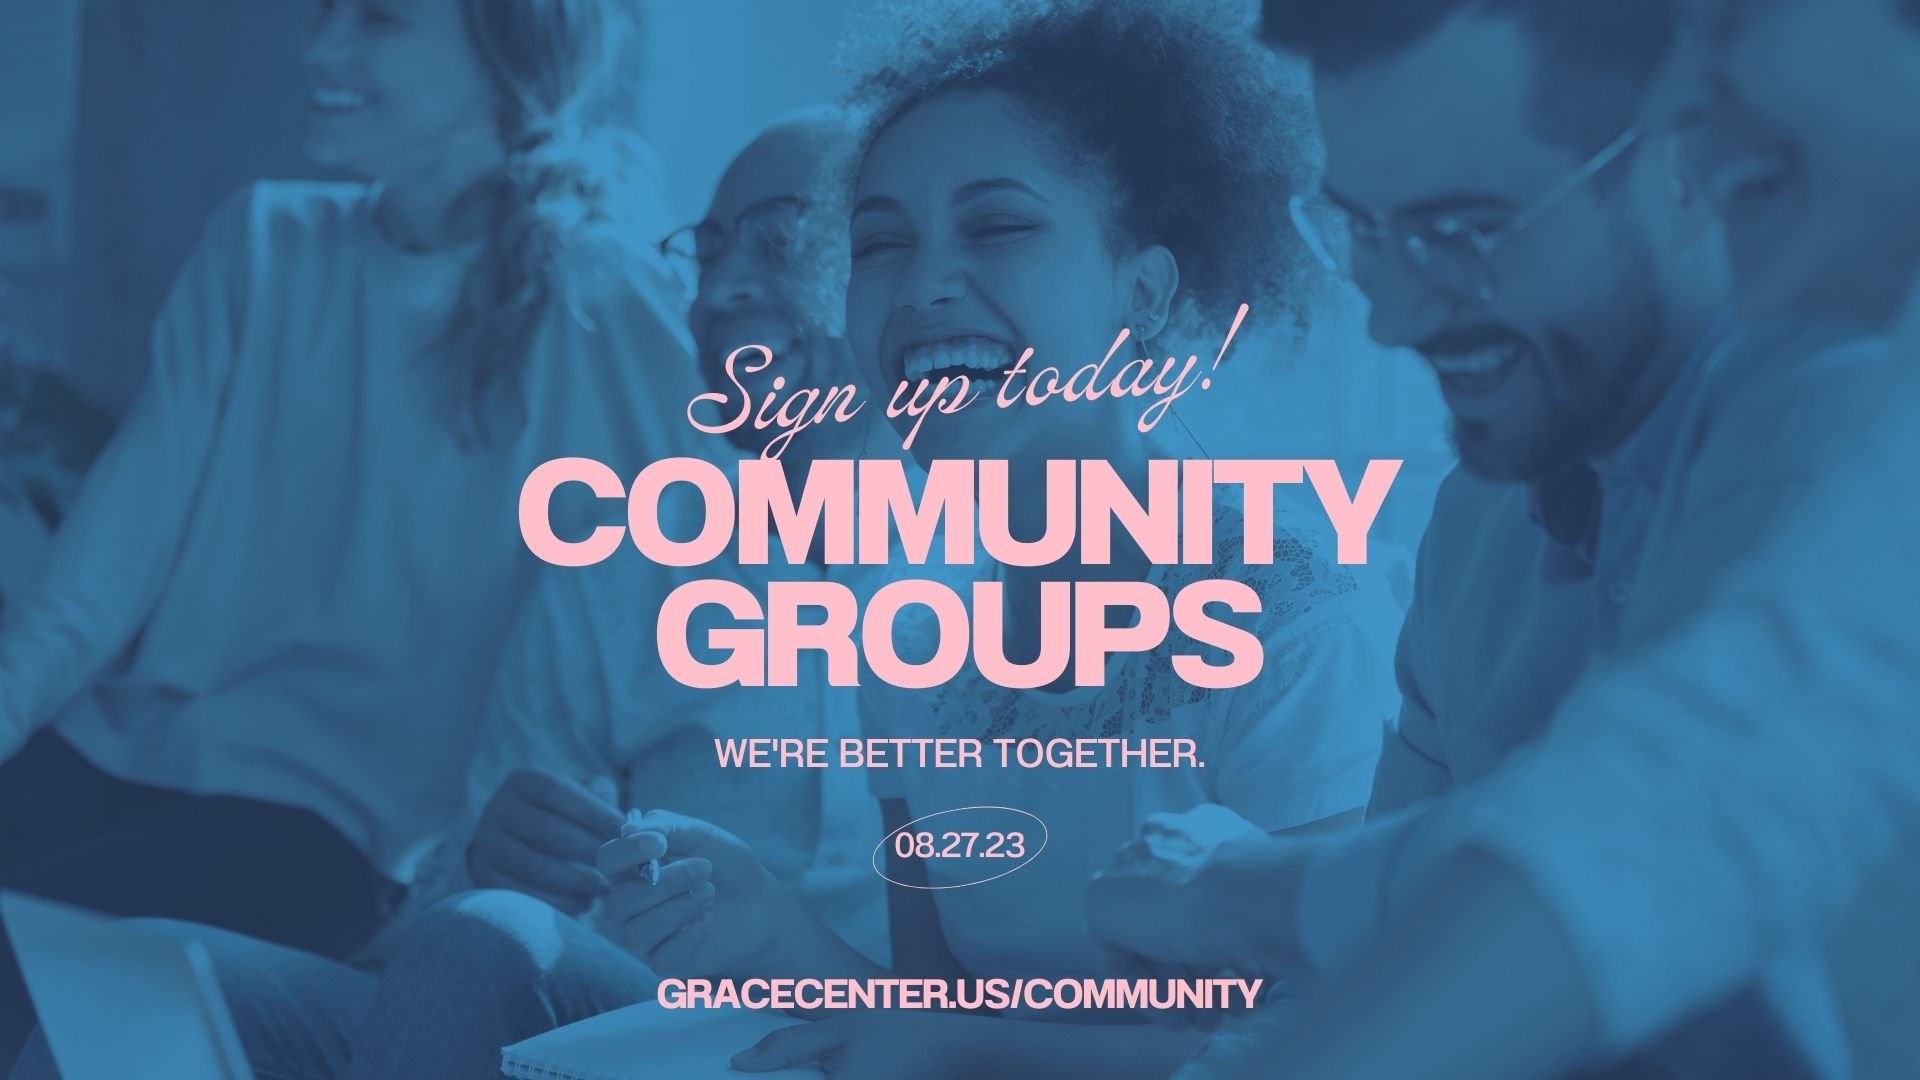 Find groups and communities to connect with